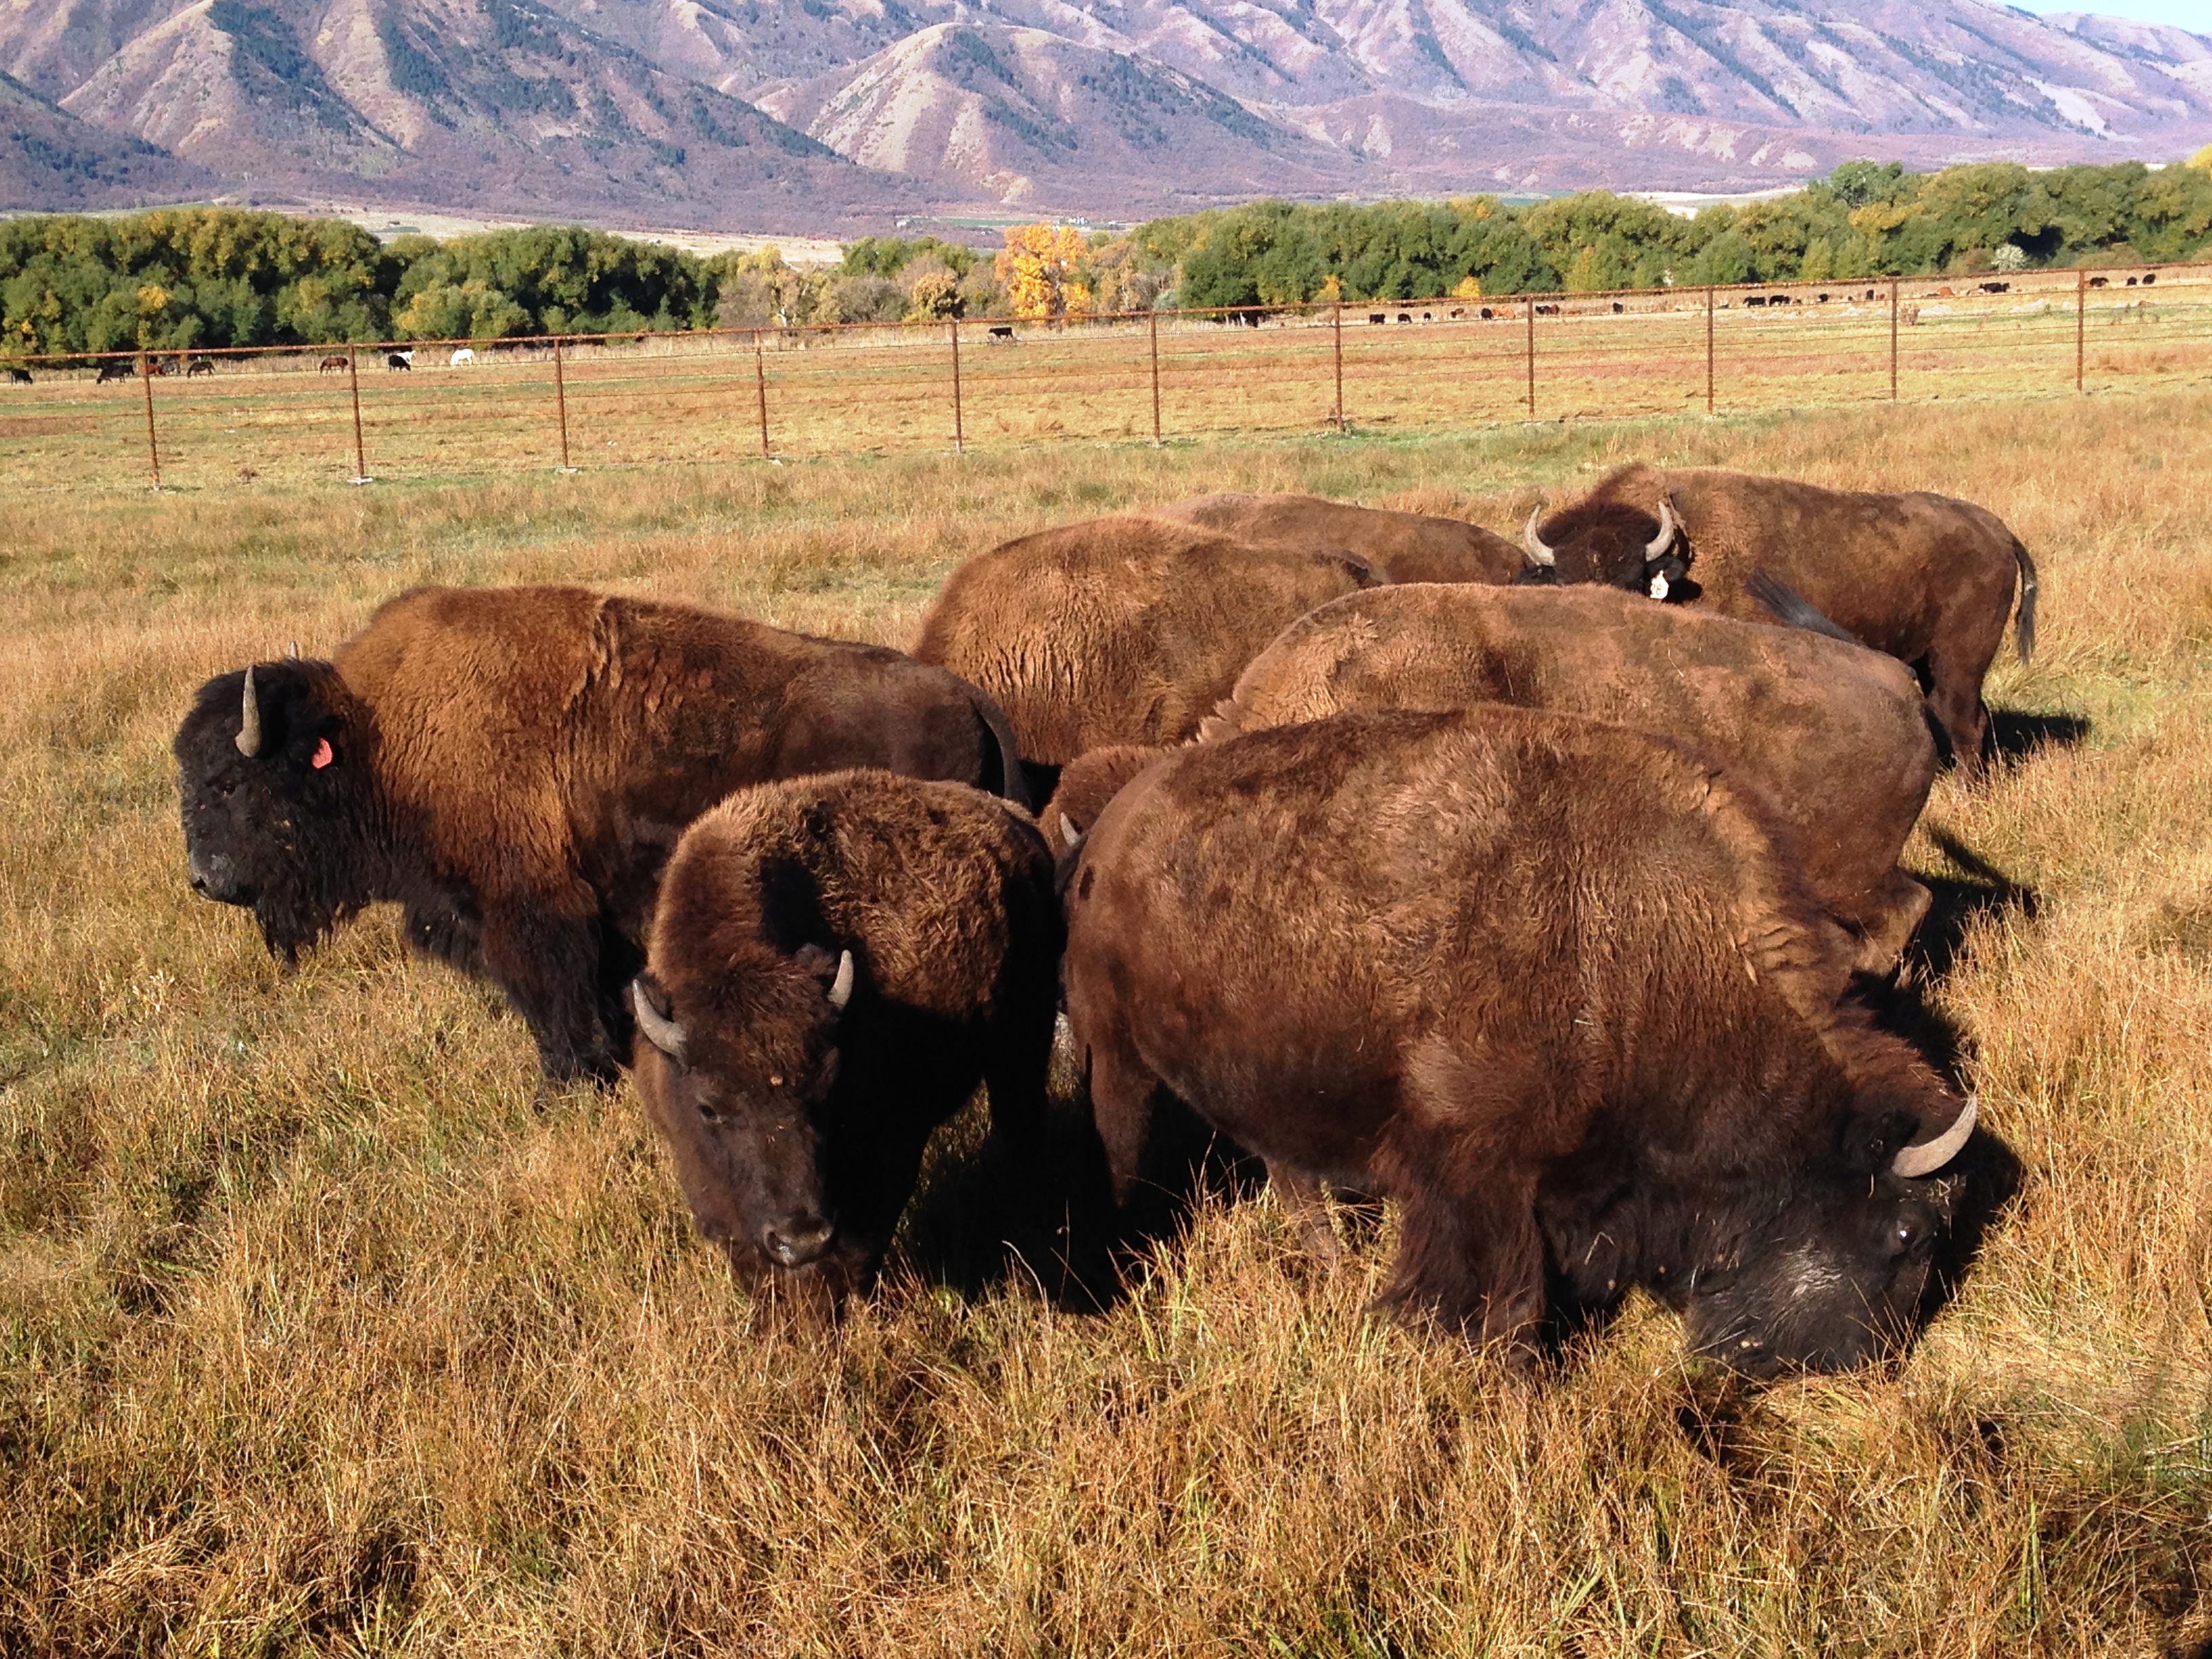 Is there a difference between buffalo and bison? We will find out on our visit to the American West Heritage Center. Photo courtesy of Logan, Utah/Cache Valley Visitors Bureau